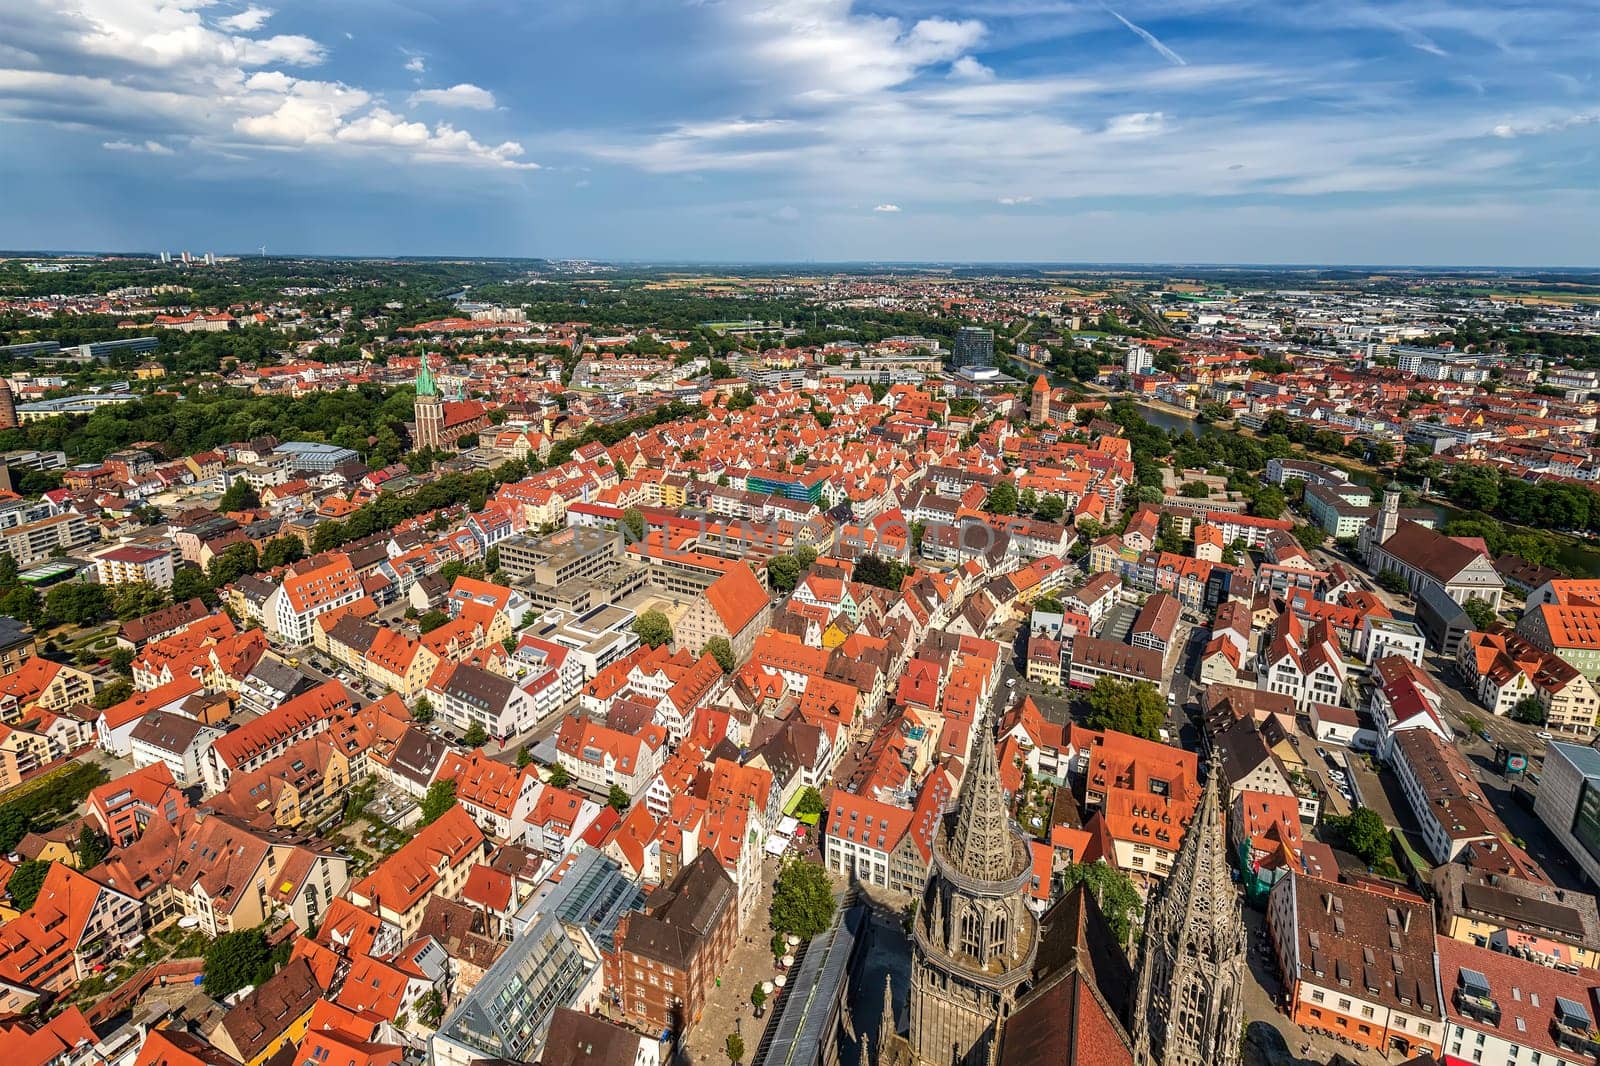 View of the red roofs of the city from above, Ulm, Germany